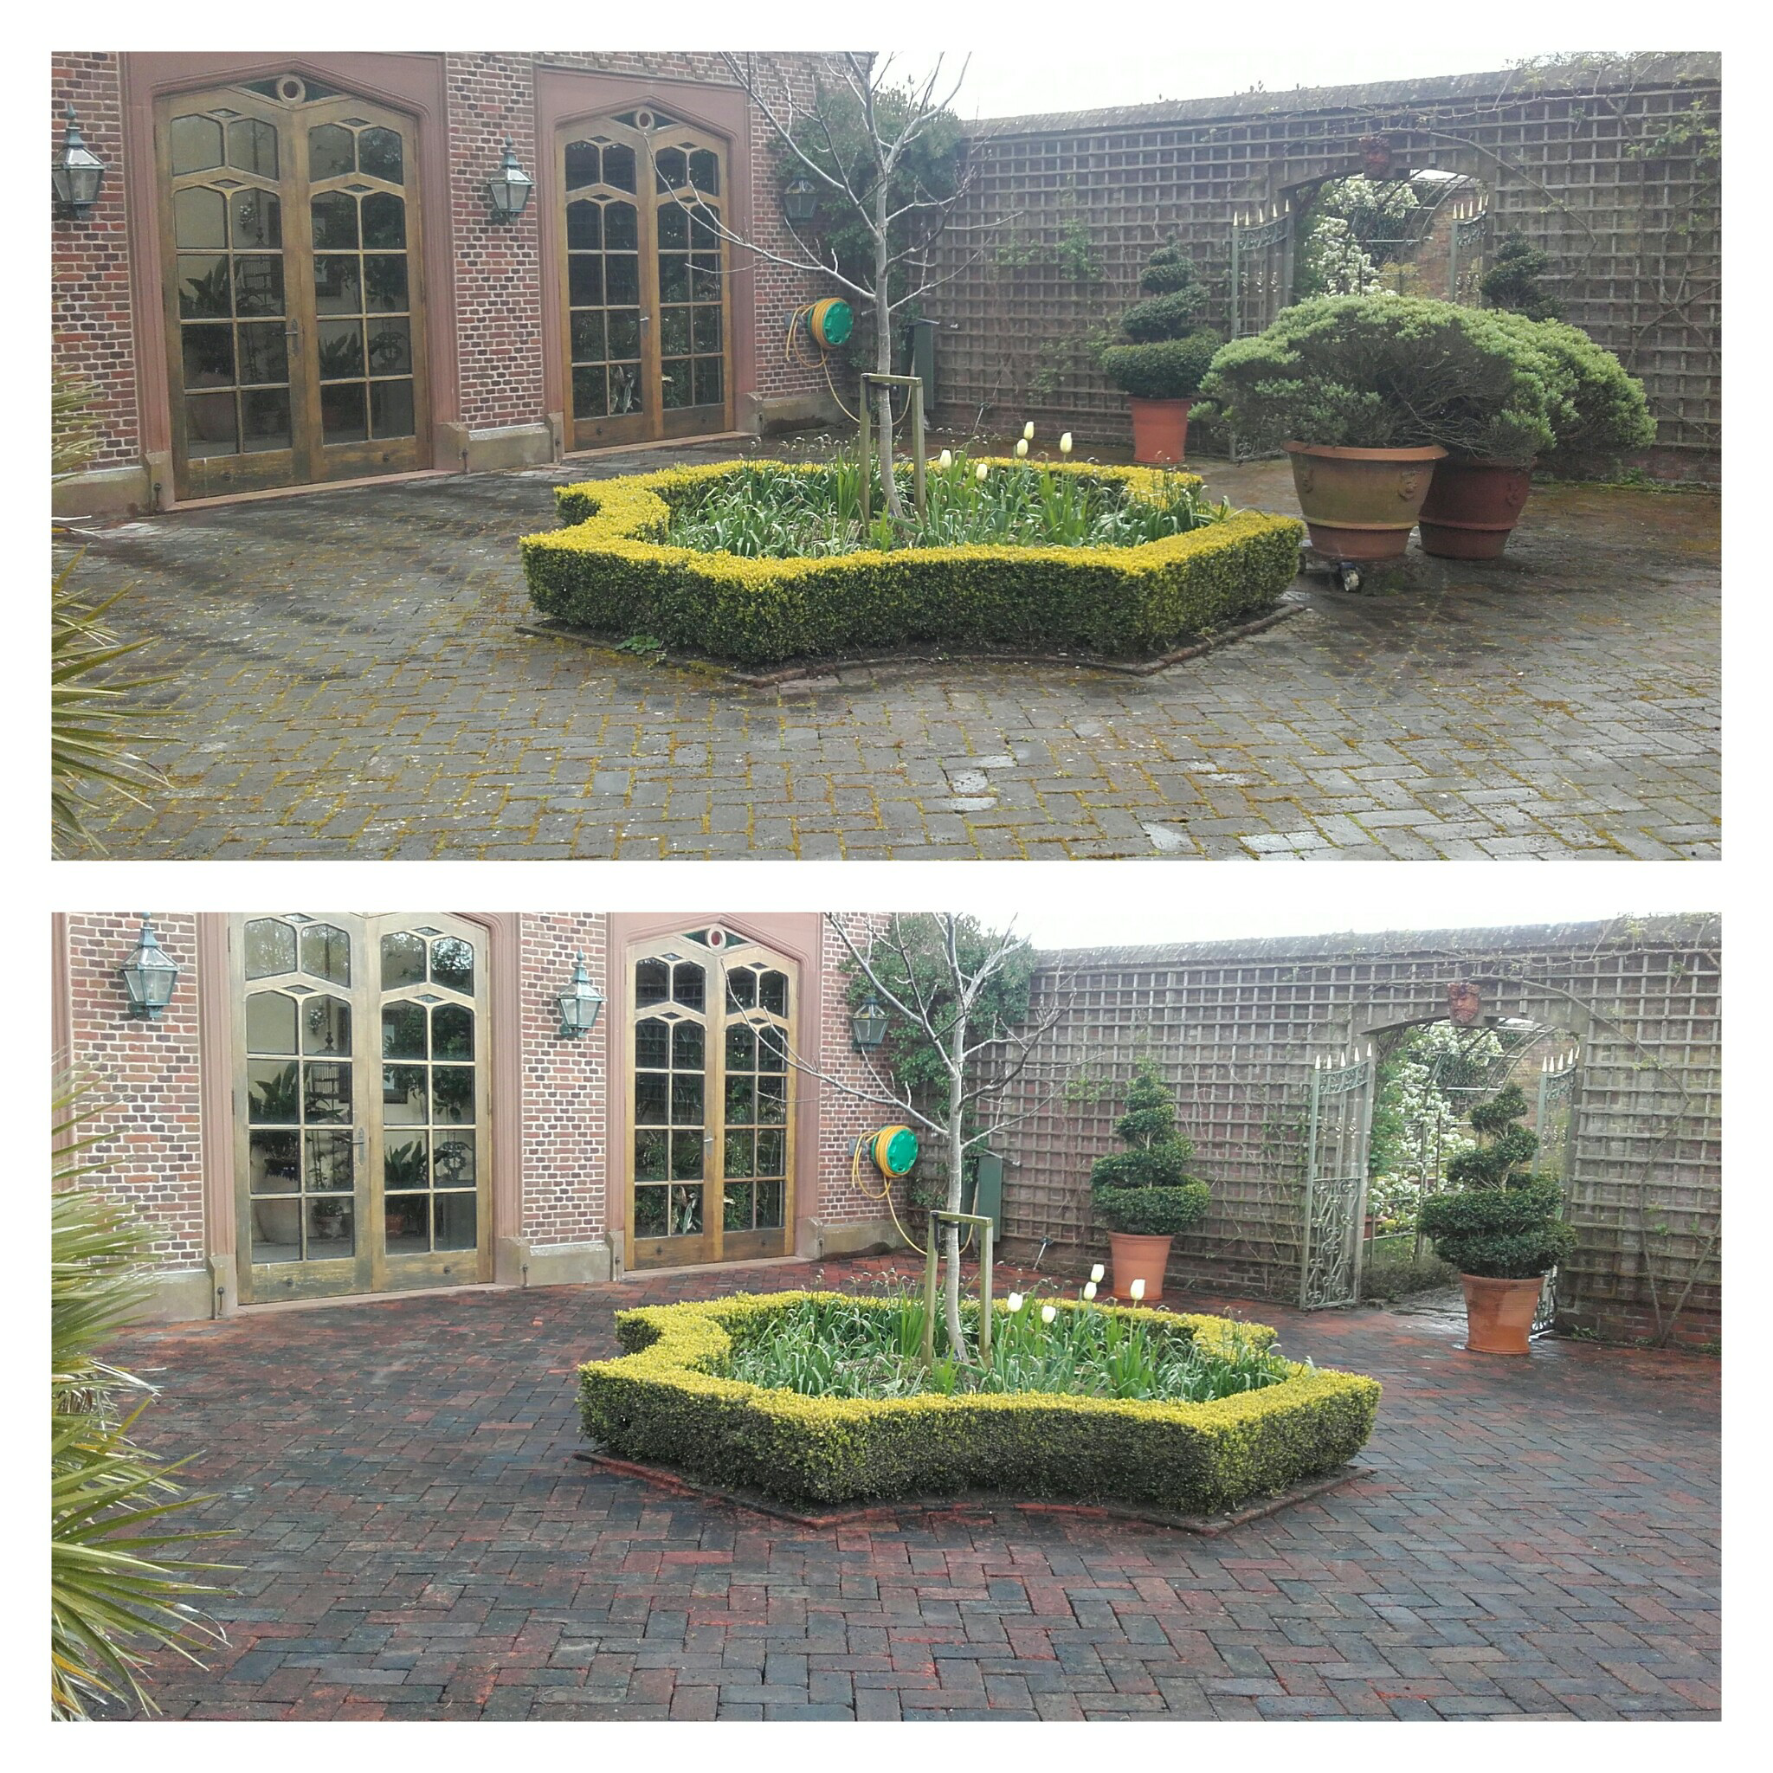 Ruabbin Red Brick Patio Cleaning - Grade 2 listed